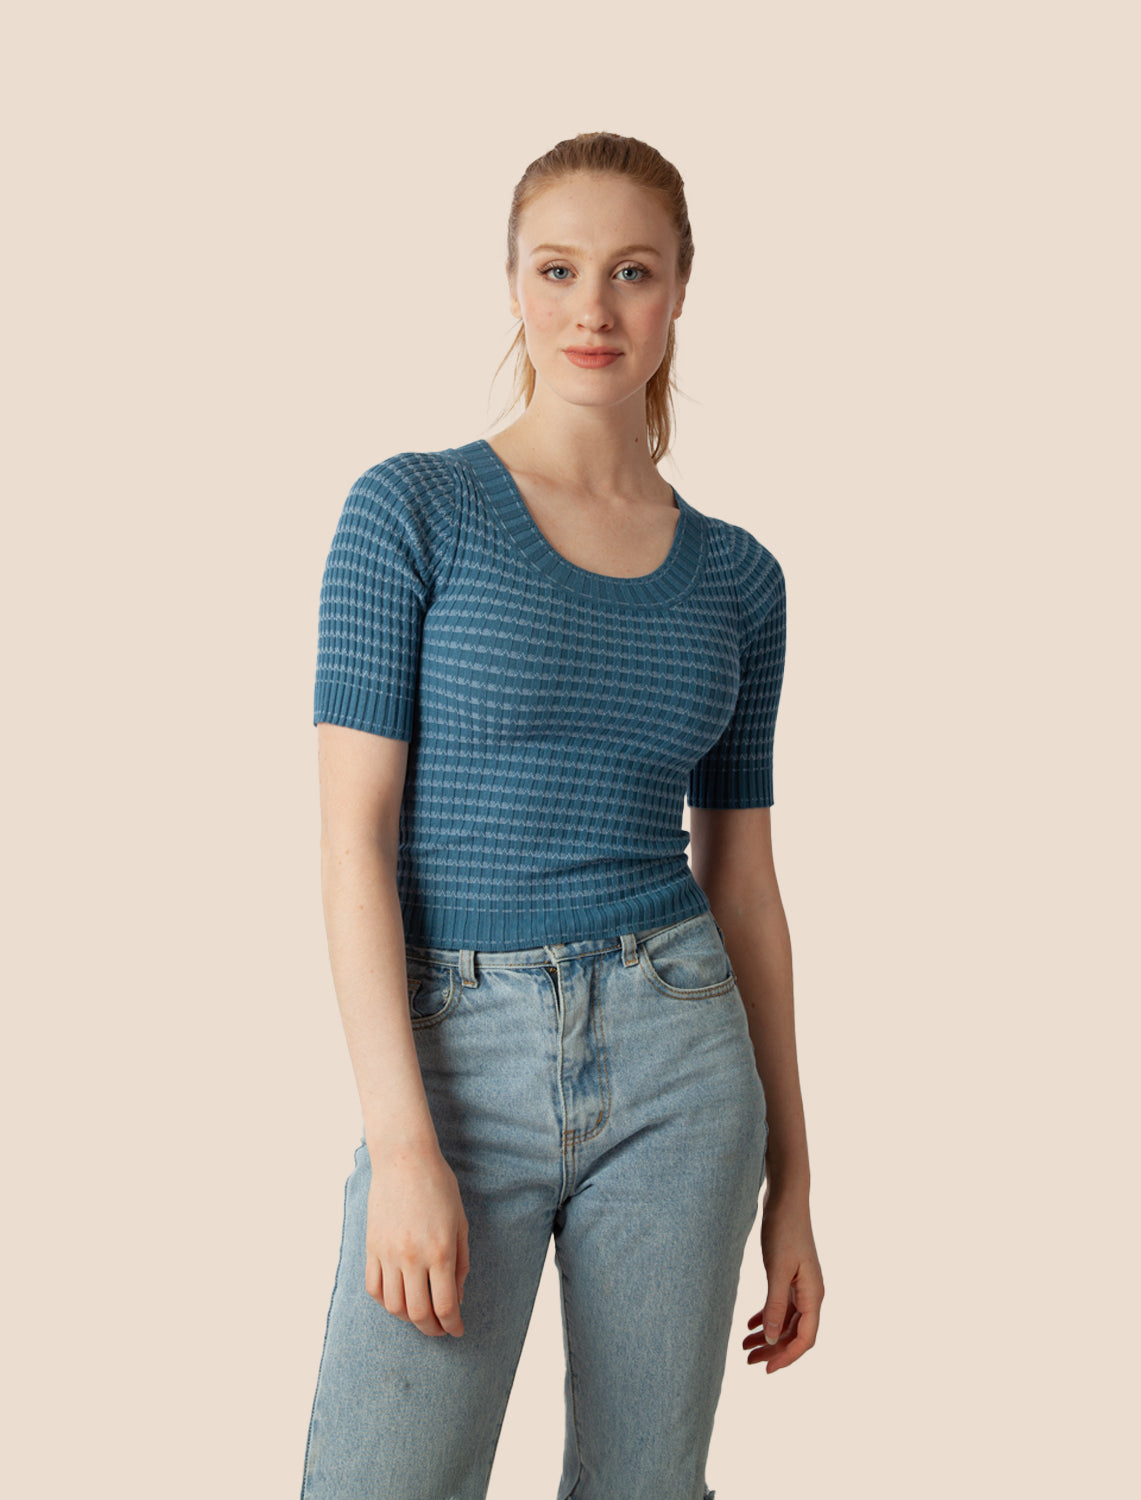 Women's Knit Tops, Cardigans, Ribbed Sleeves, Vests & More